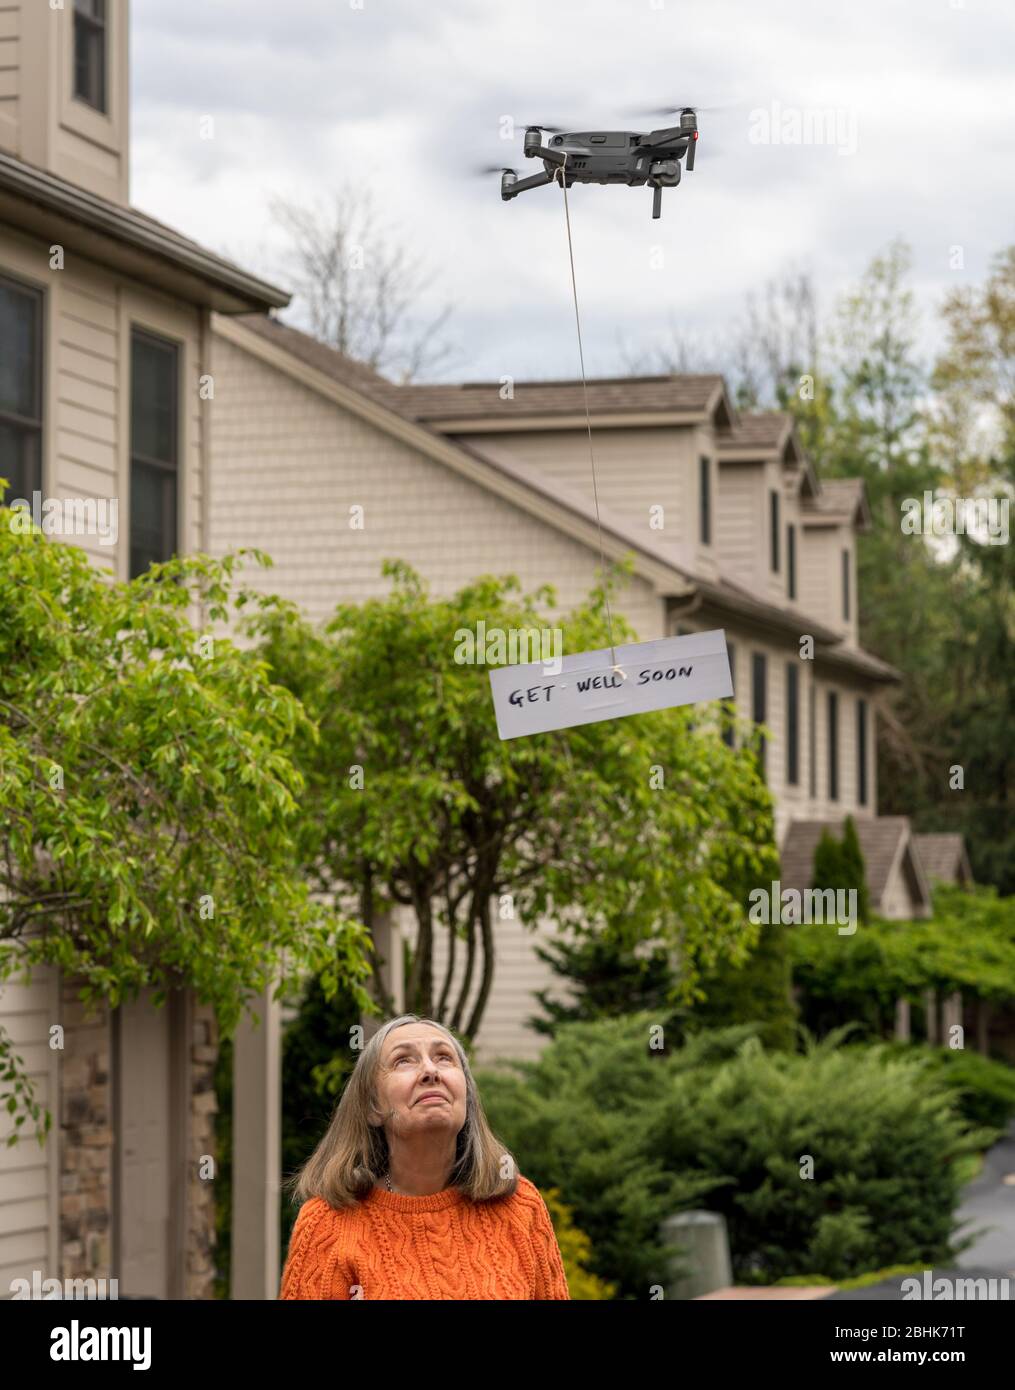 Flying drone delivering a get well soon message touch free to a quarantineed grandmother during coronavirus epidemic Stock Photo